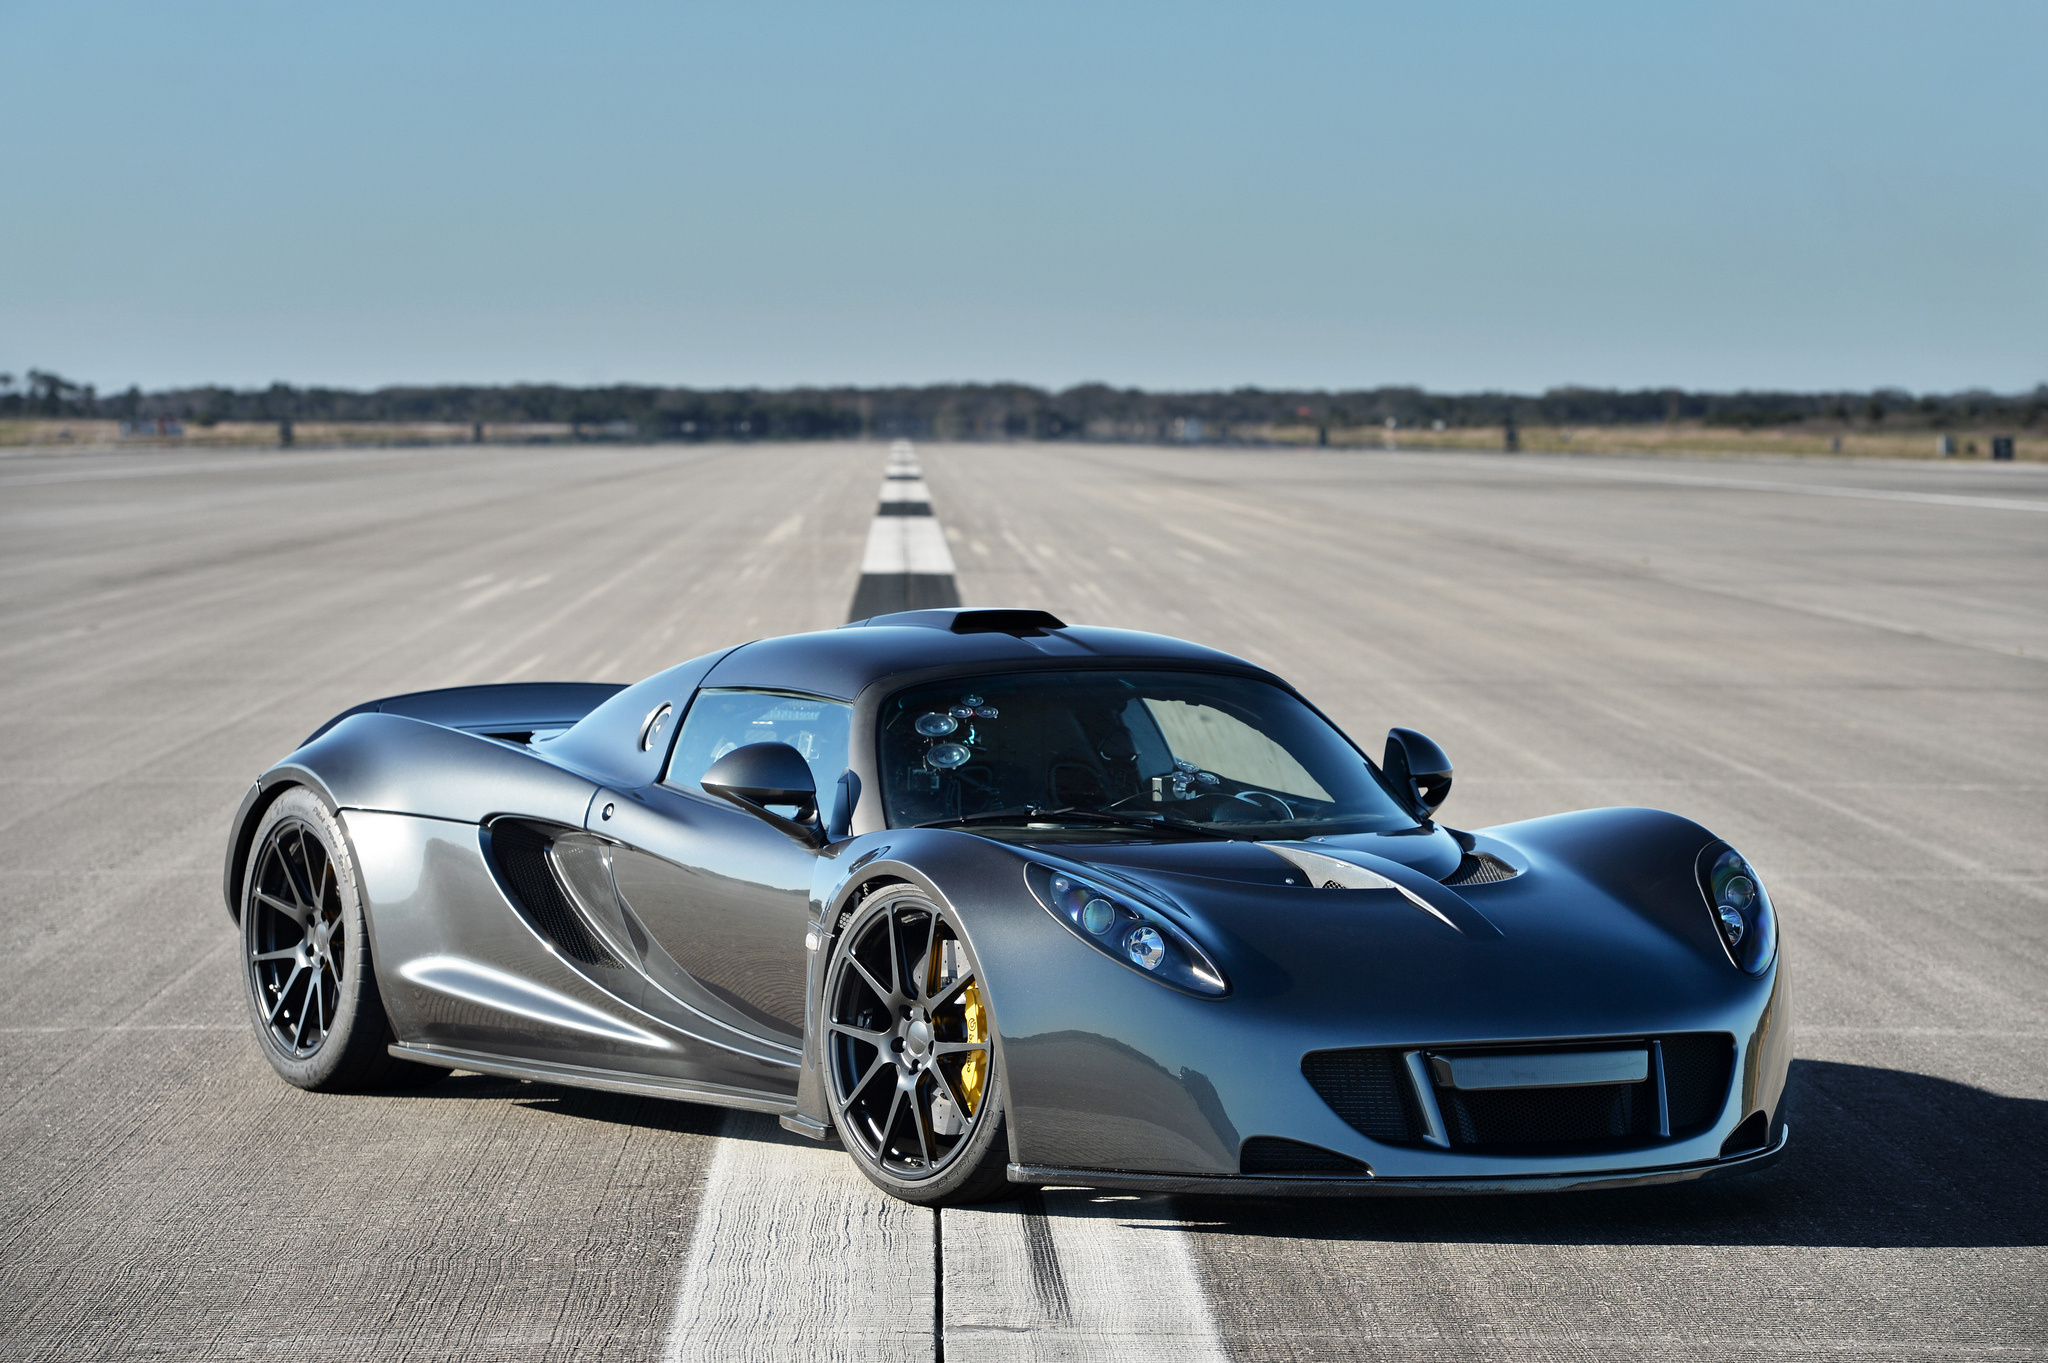 hennessey, vehicles, hennessey venom gt, car, silver car, supercar phone background